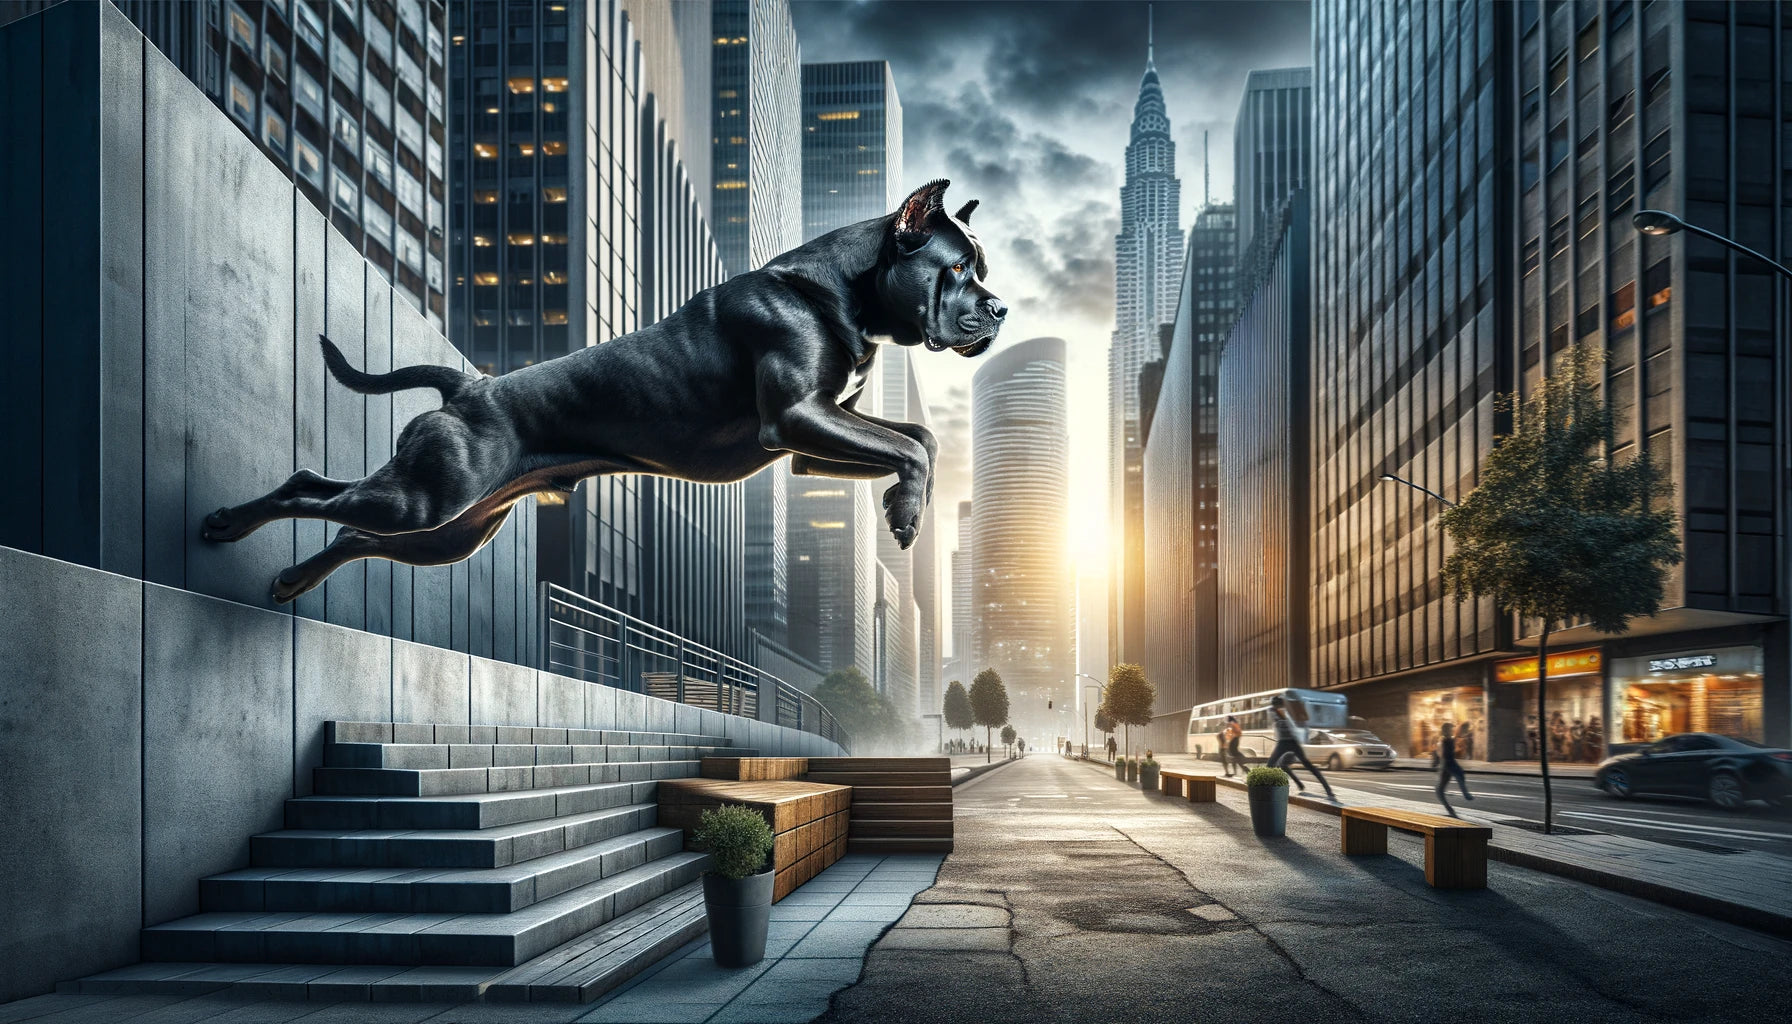 Cane Corso performing parkour or Dogour in an urban setting.